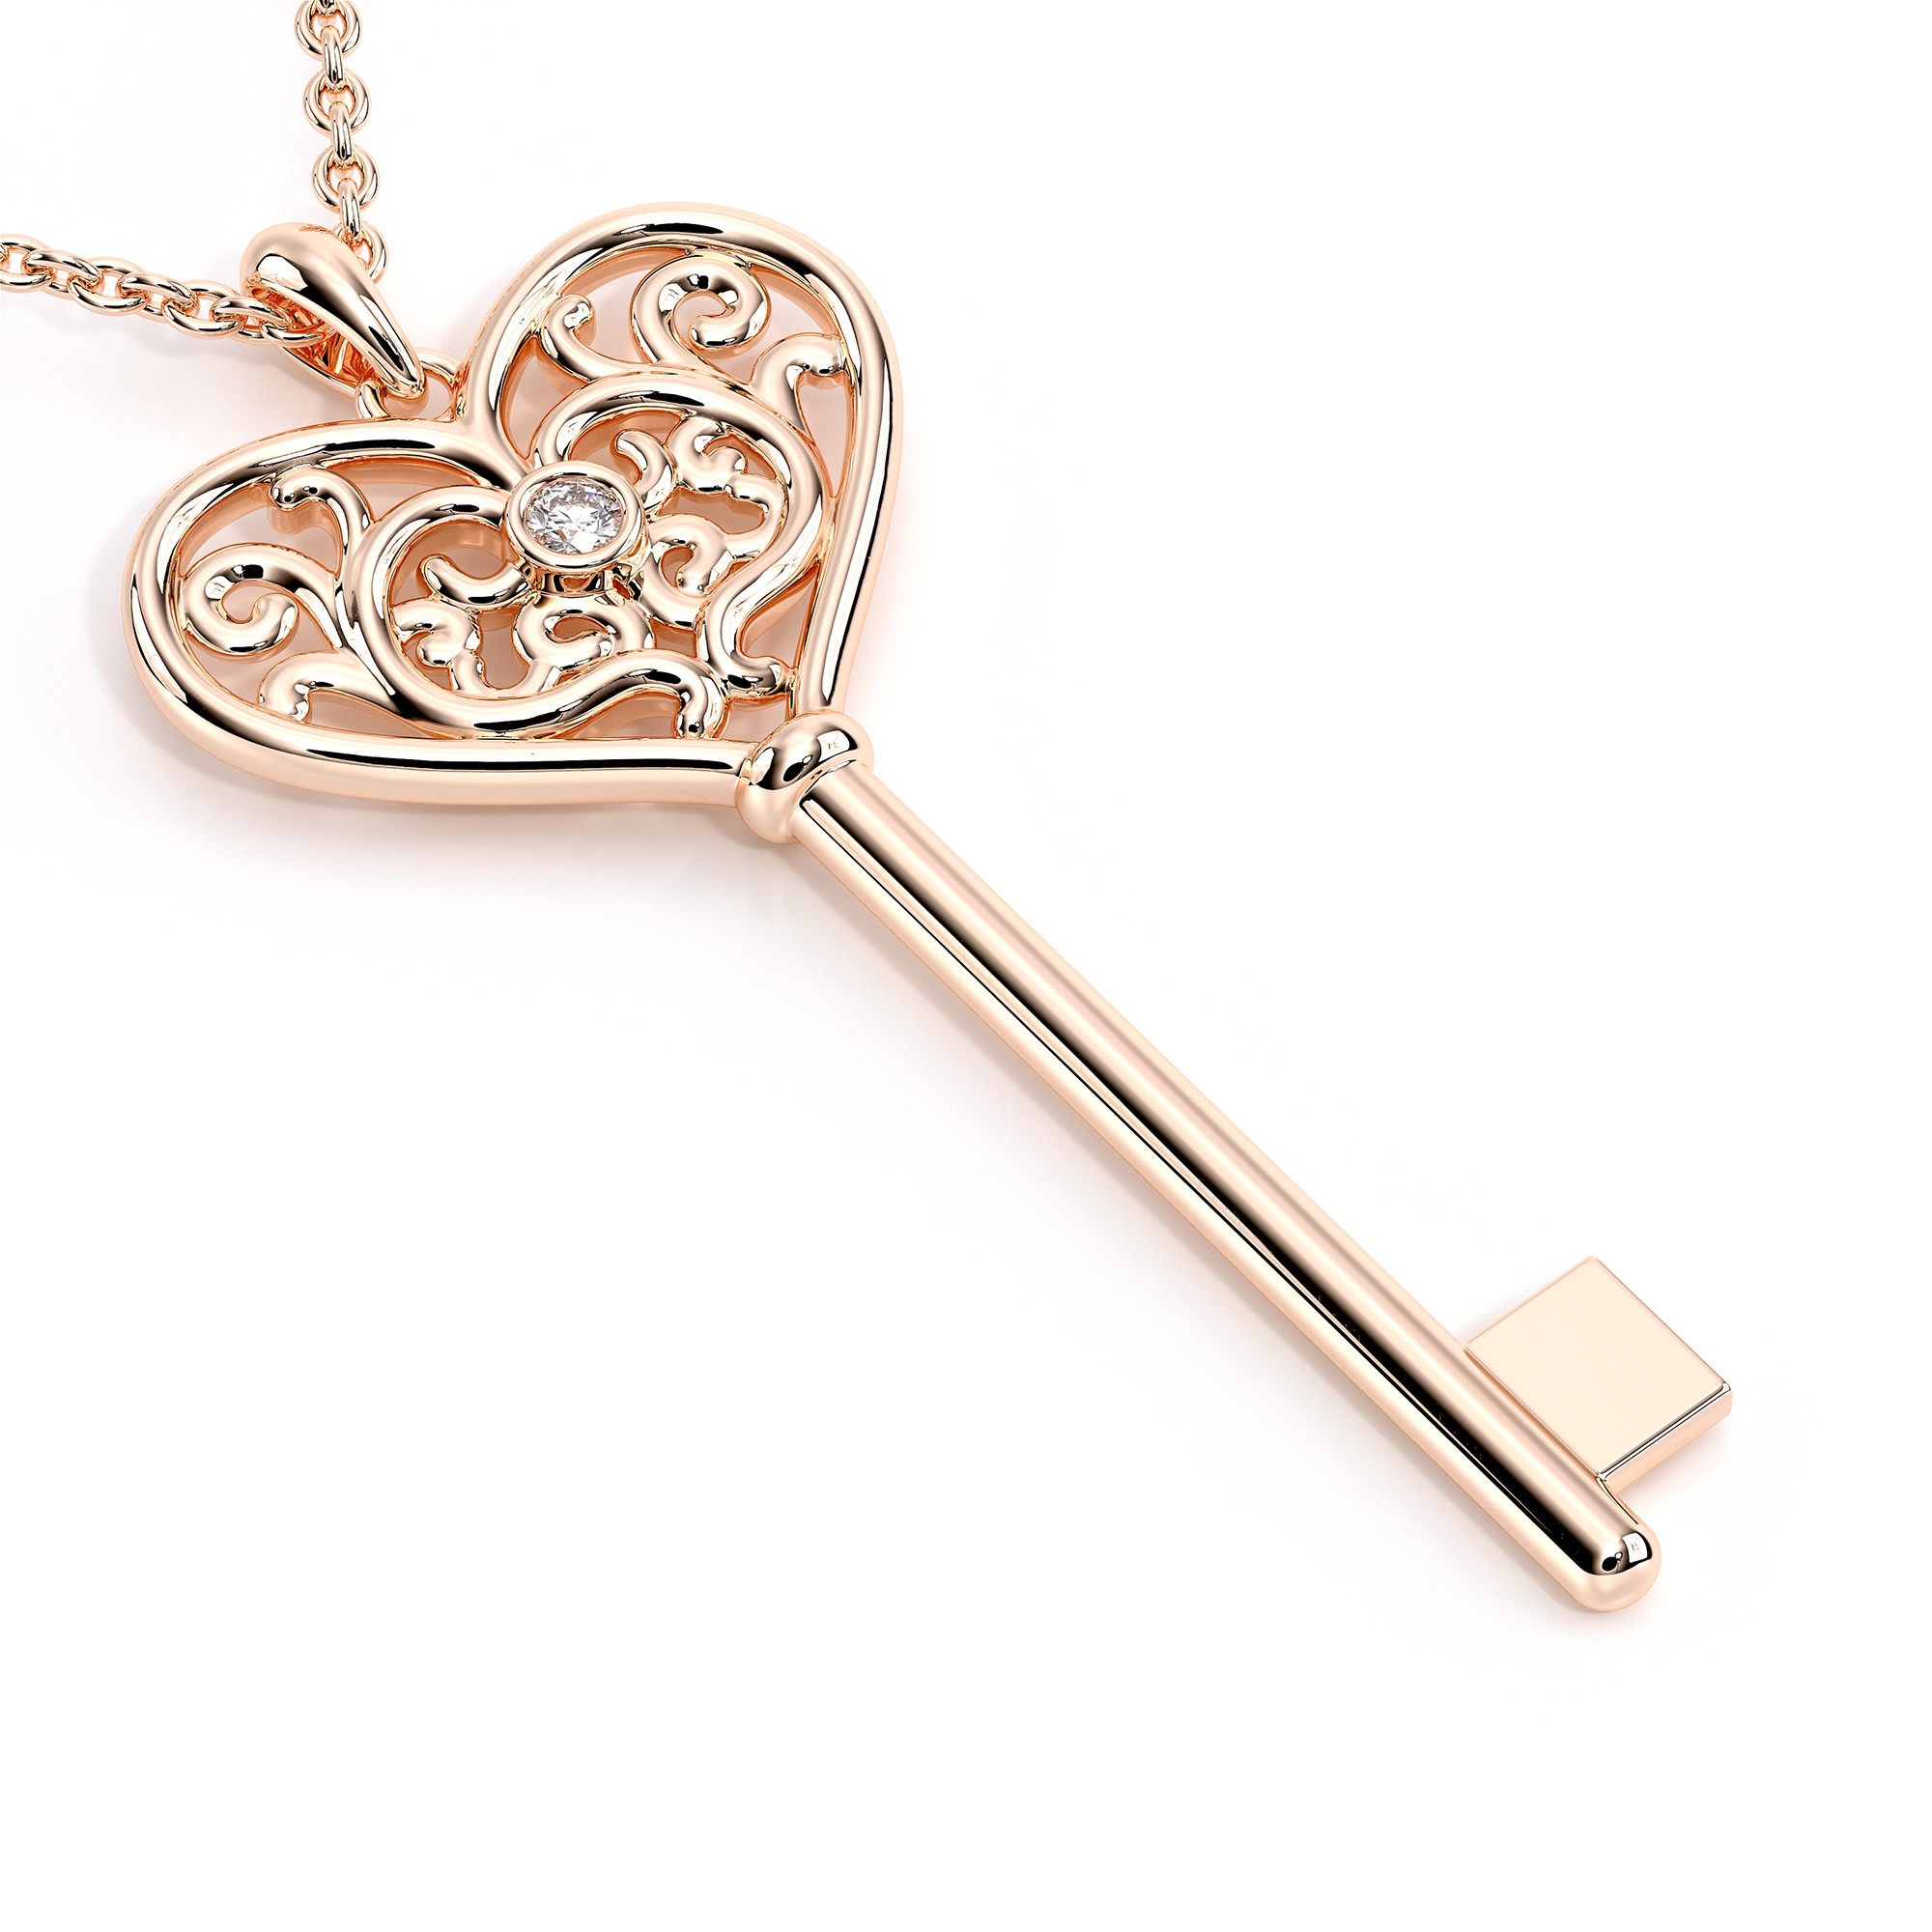 14k rose gold or white gold over 925 silver key pendant necklace with  accents